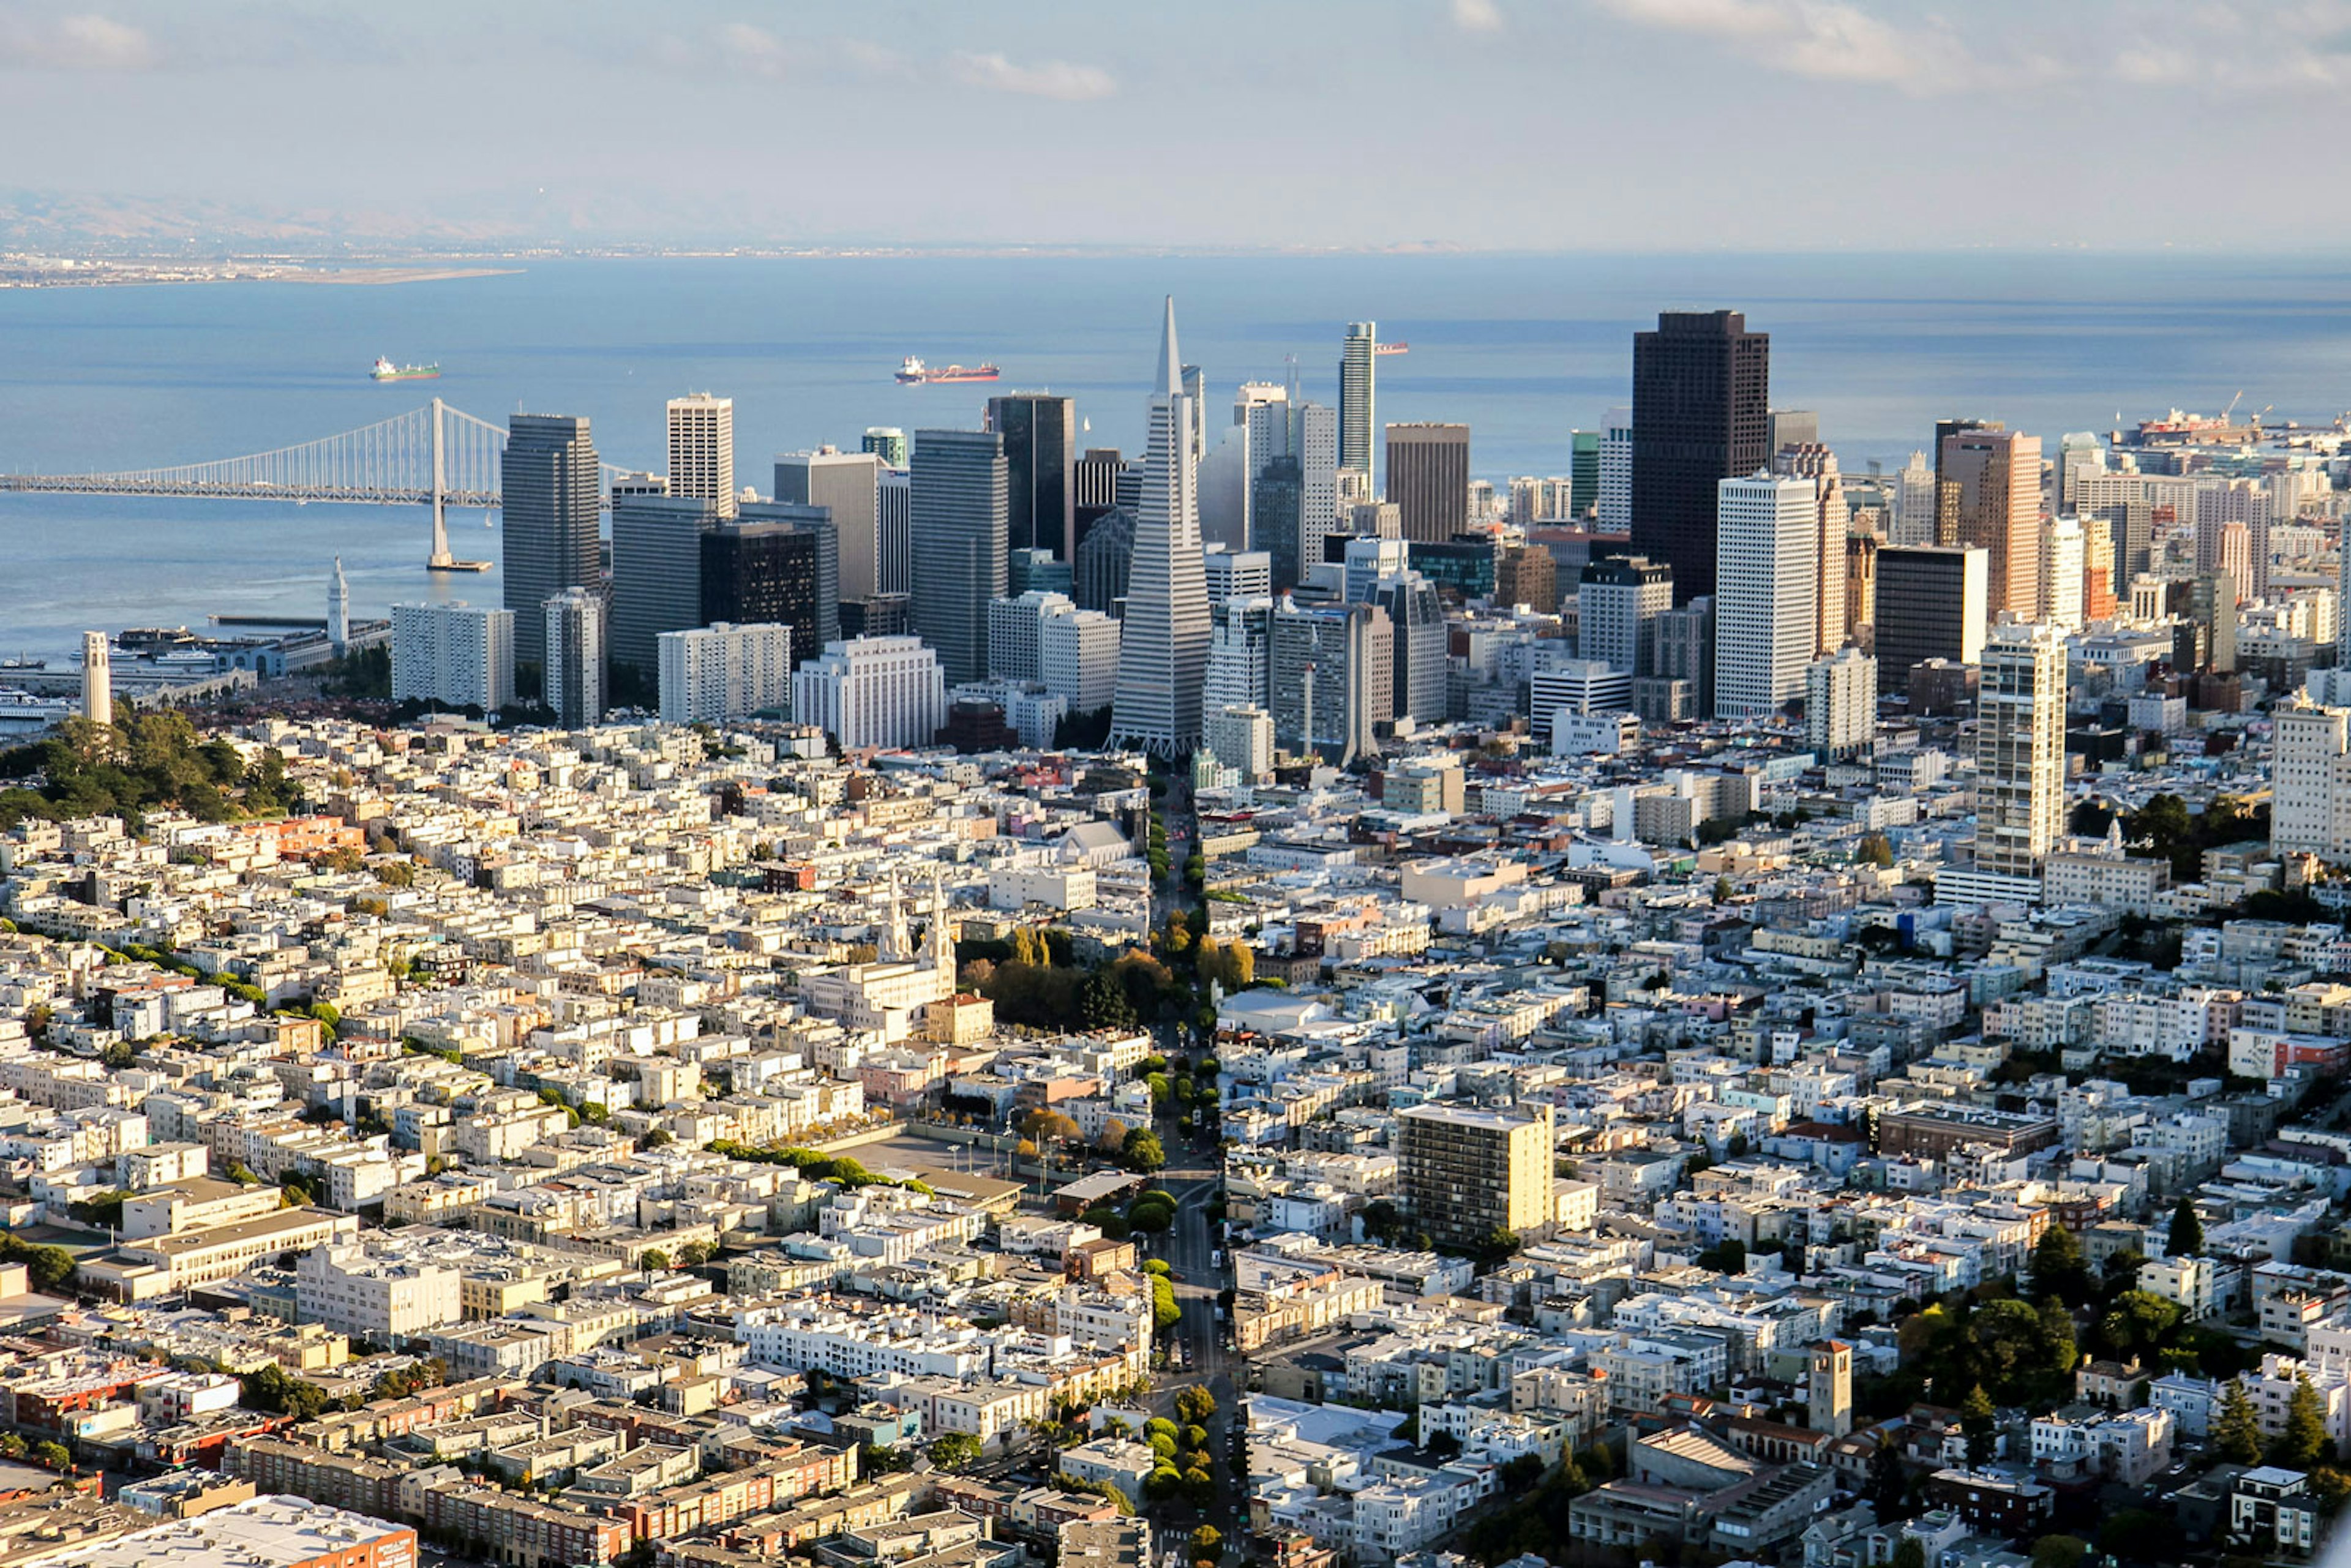 Aerial view of the San Francisco skyline with the bay in the background